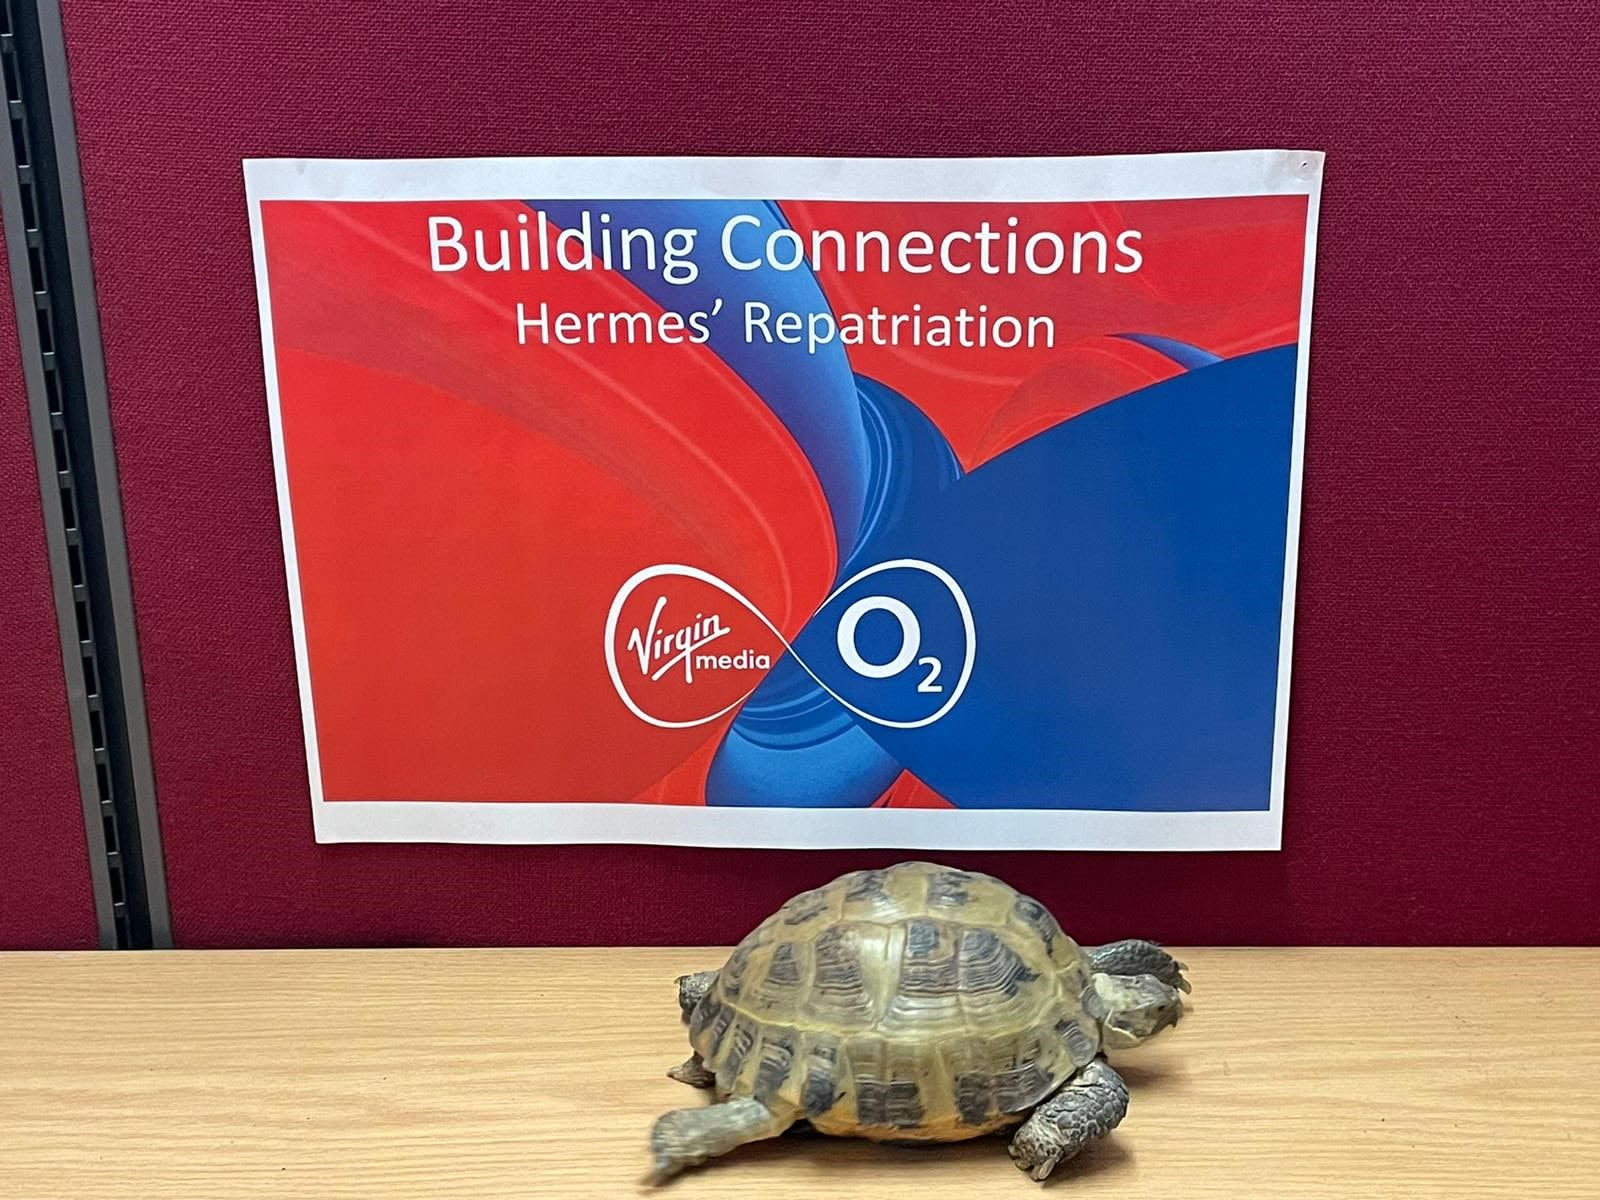 Hermes the tortoise positioned in front of a Virgin Media 'Building Connections' signage